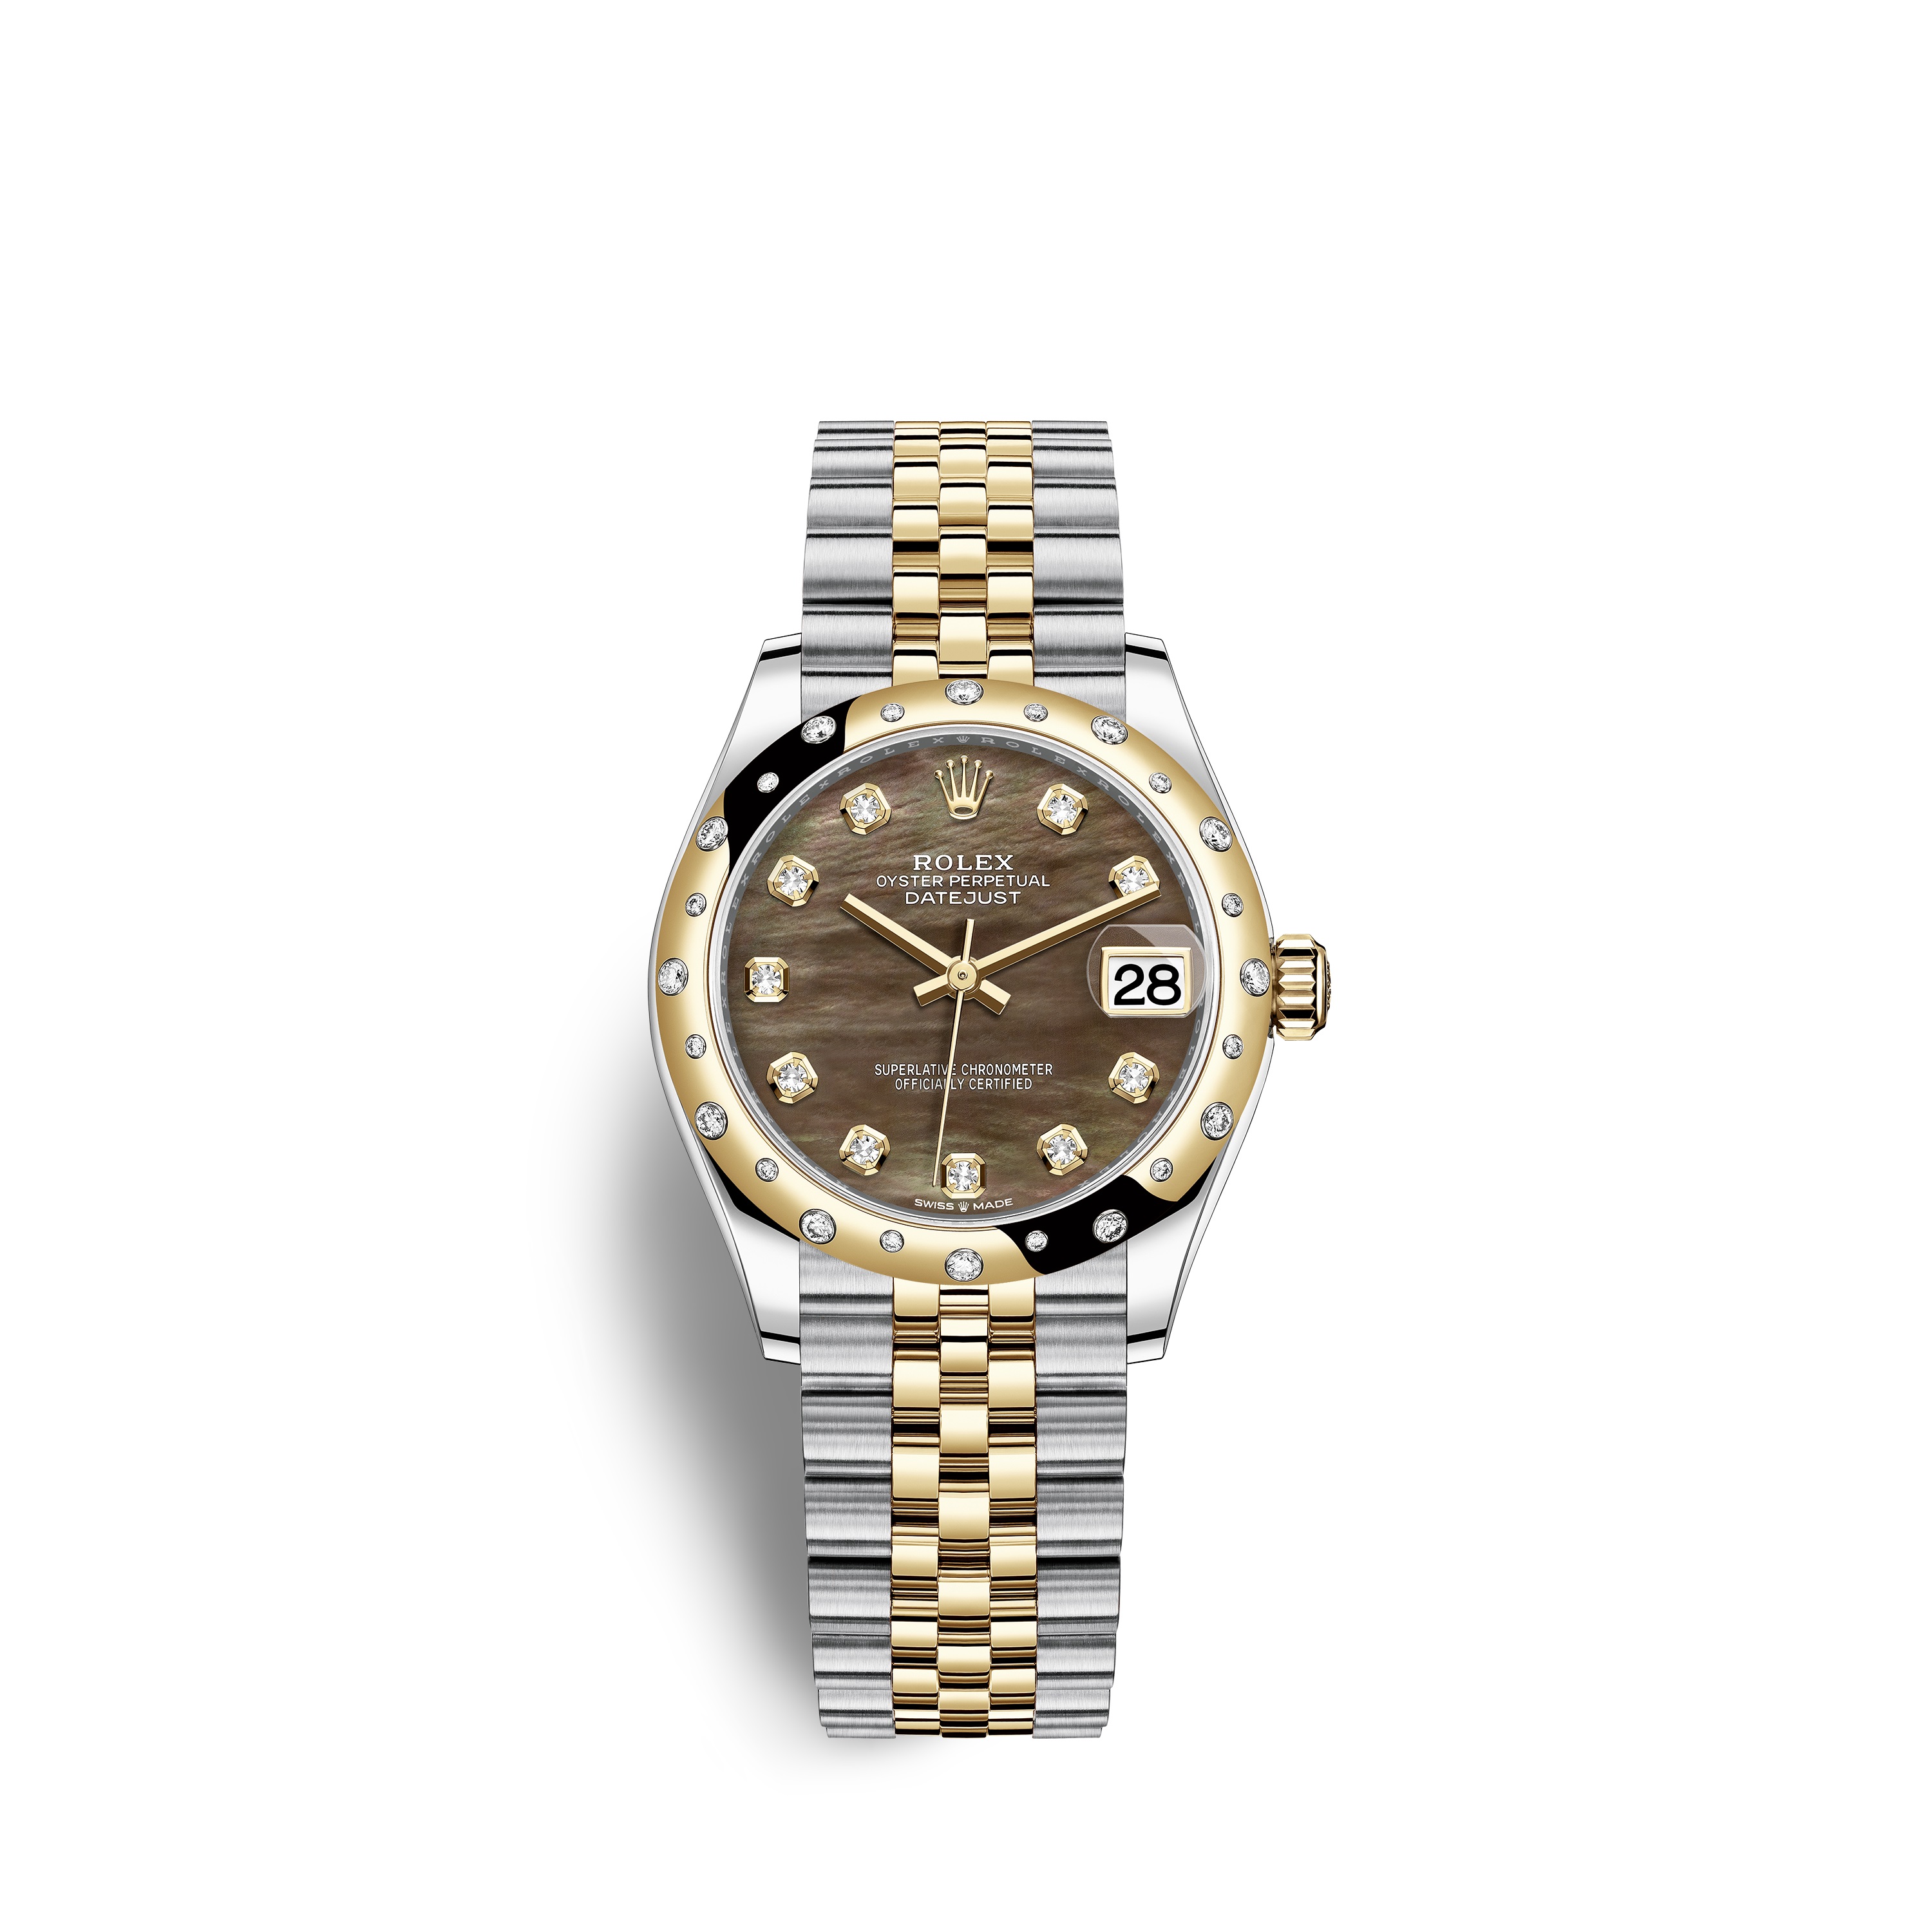 Datejust 31 278343RBR Gold & Stainless Steel Watch (Black Mother-of-Pearl Set with Diamonds)